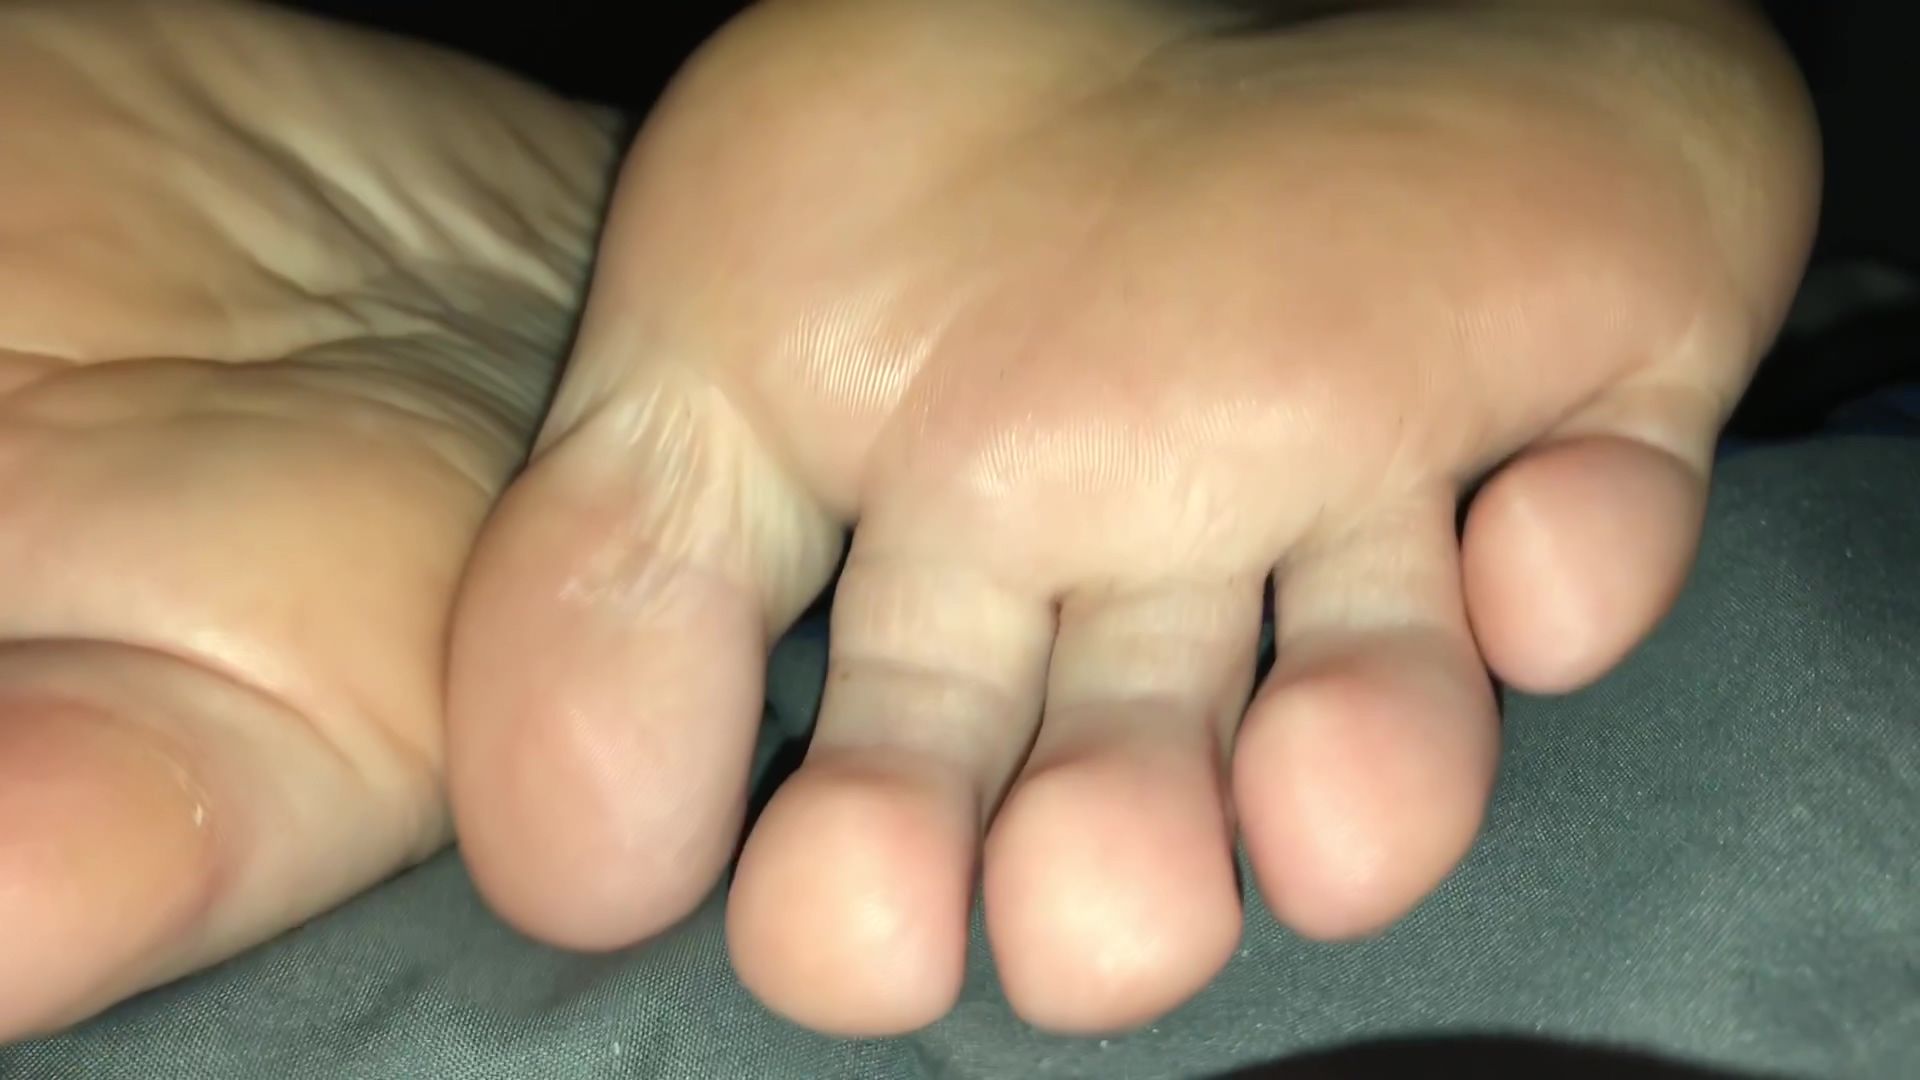 Grosso Saras Sweaty And Smelly Soles After Work Stretching